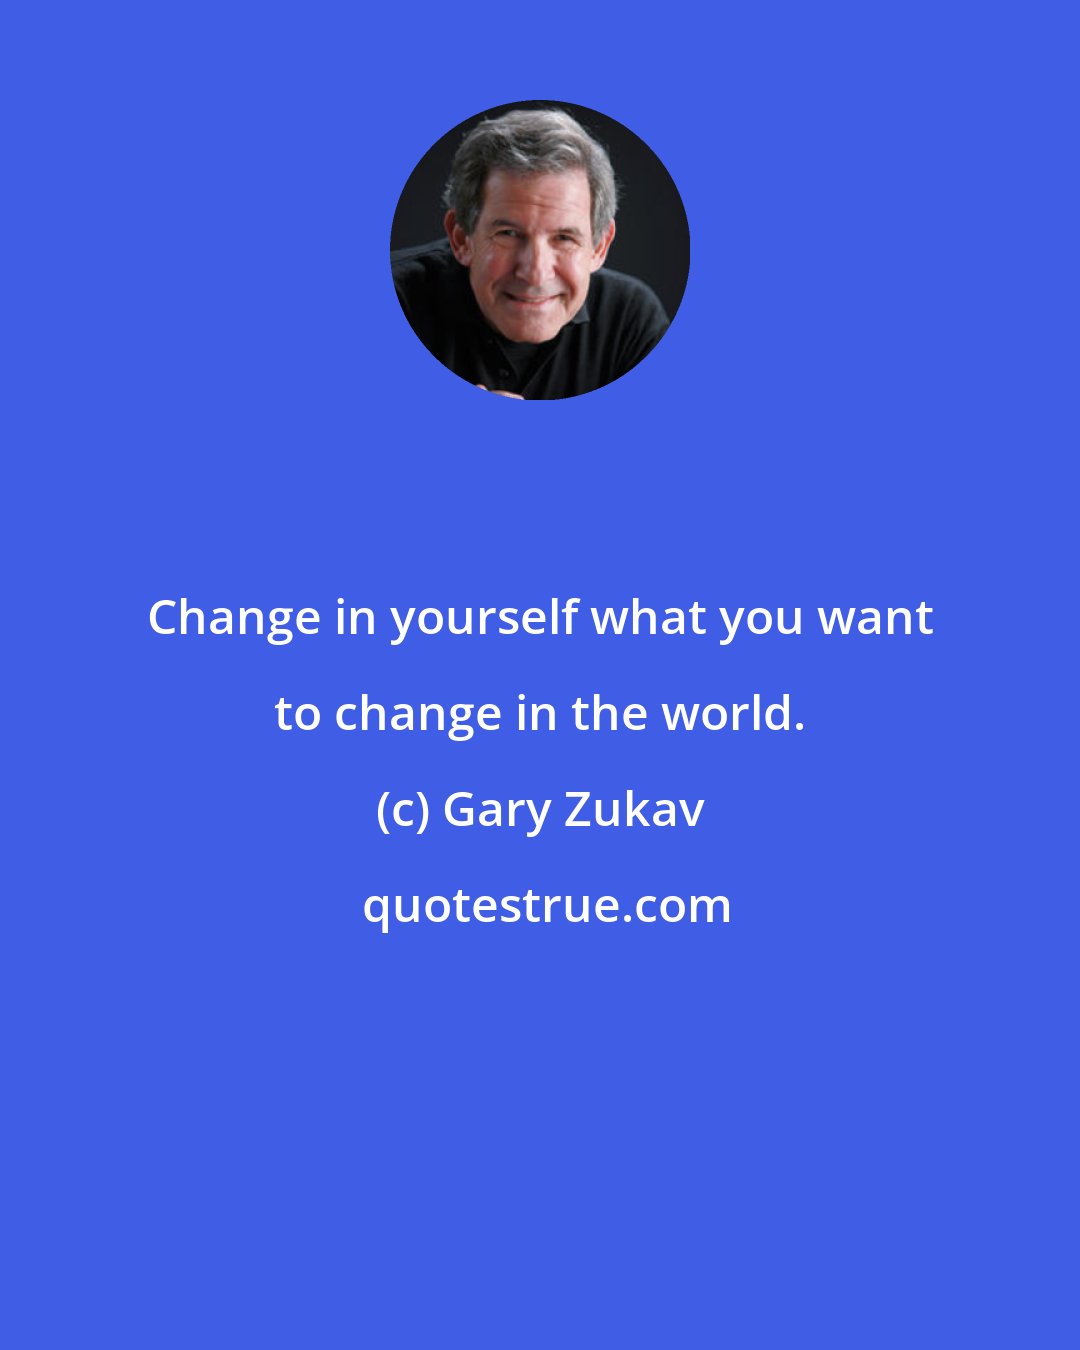 Gary Zukav: Change in yourself what you want to change in the world.